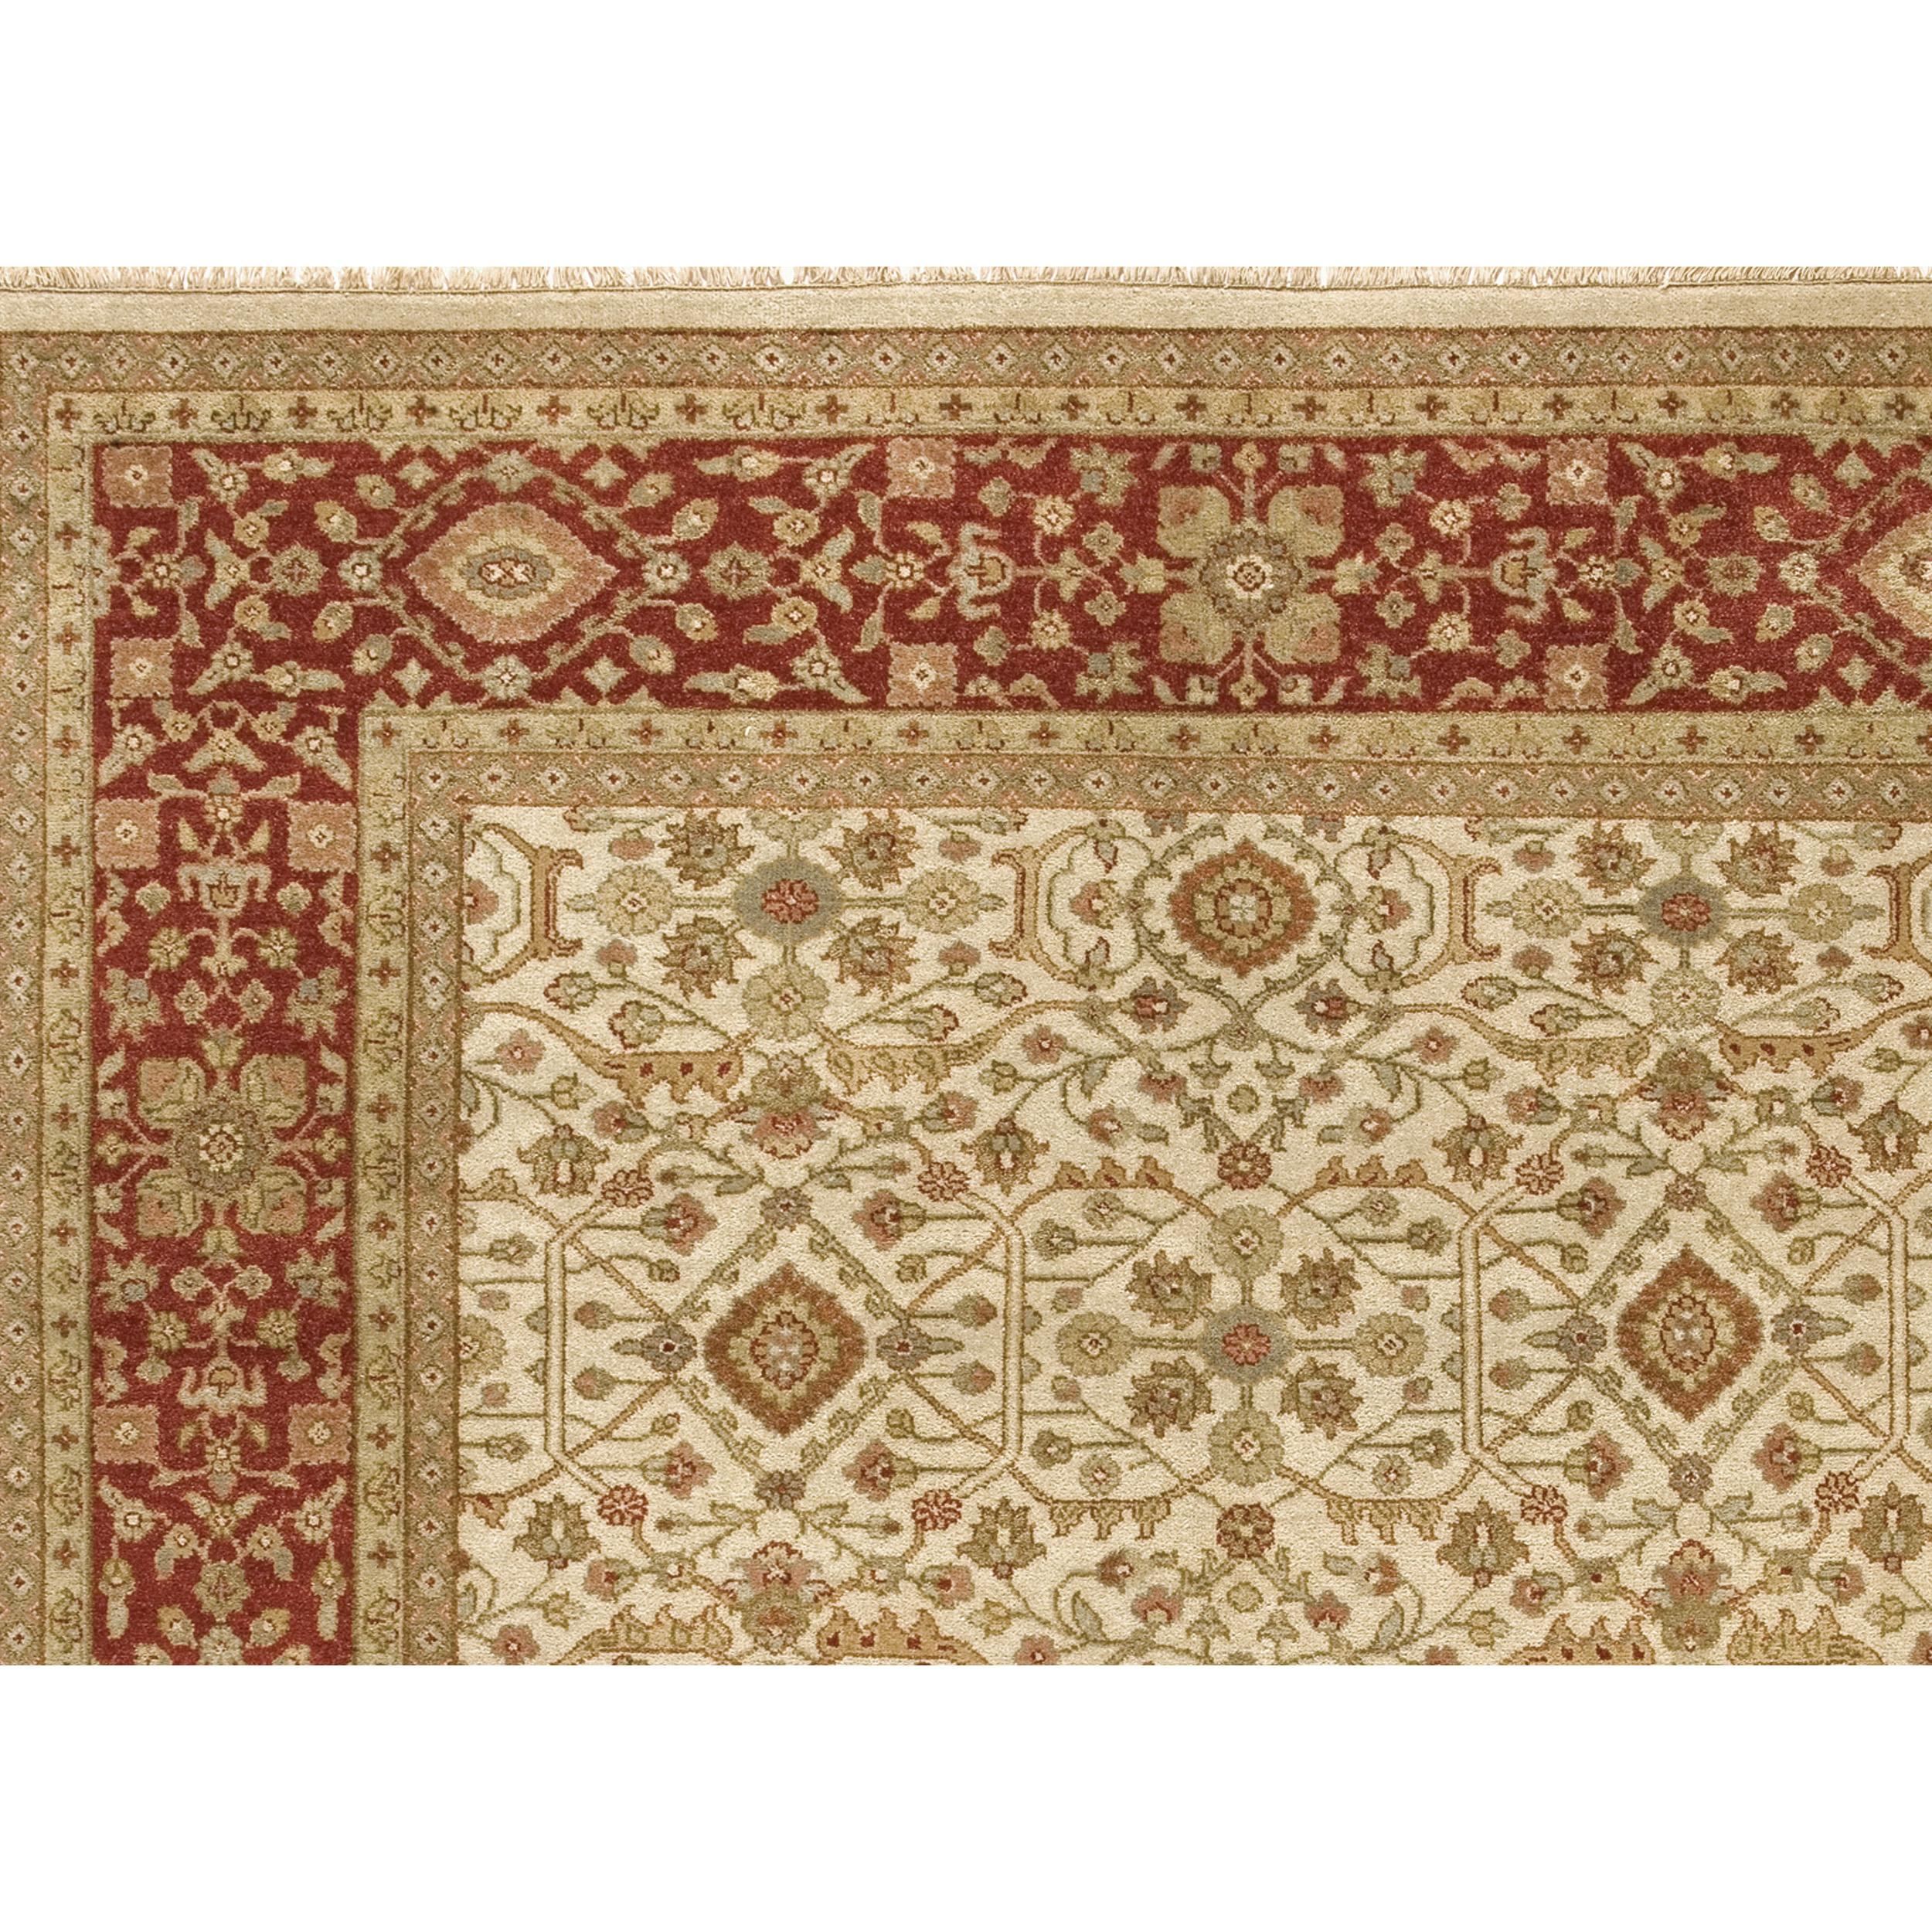 Meticulously crafted, this rug employs the most intricate traditional weaving techniques in India, guided by the expertise of skilled artisans. Crafted from the finest, most exquisite wools, renowned for their exceptional quality and softness. The